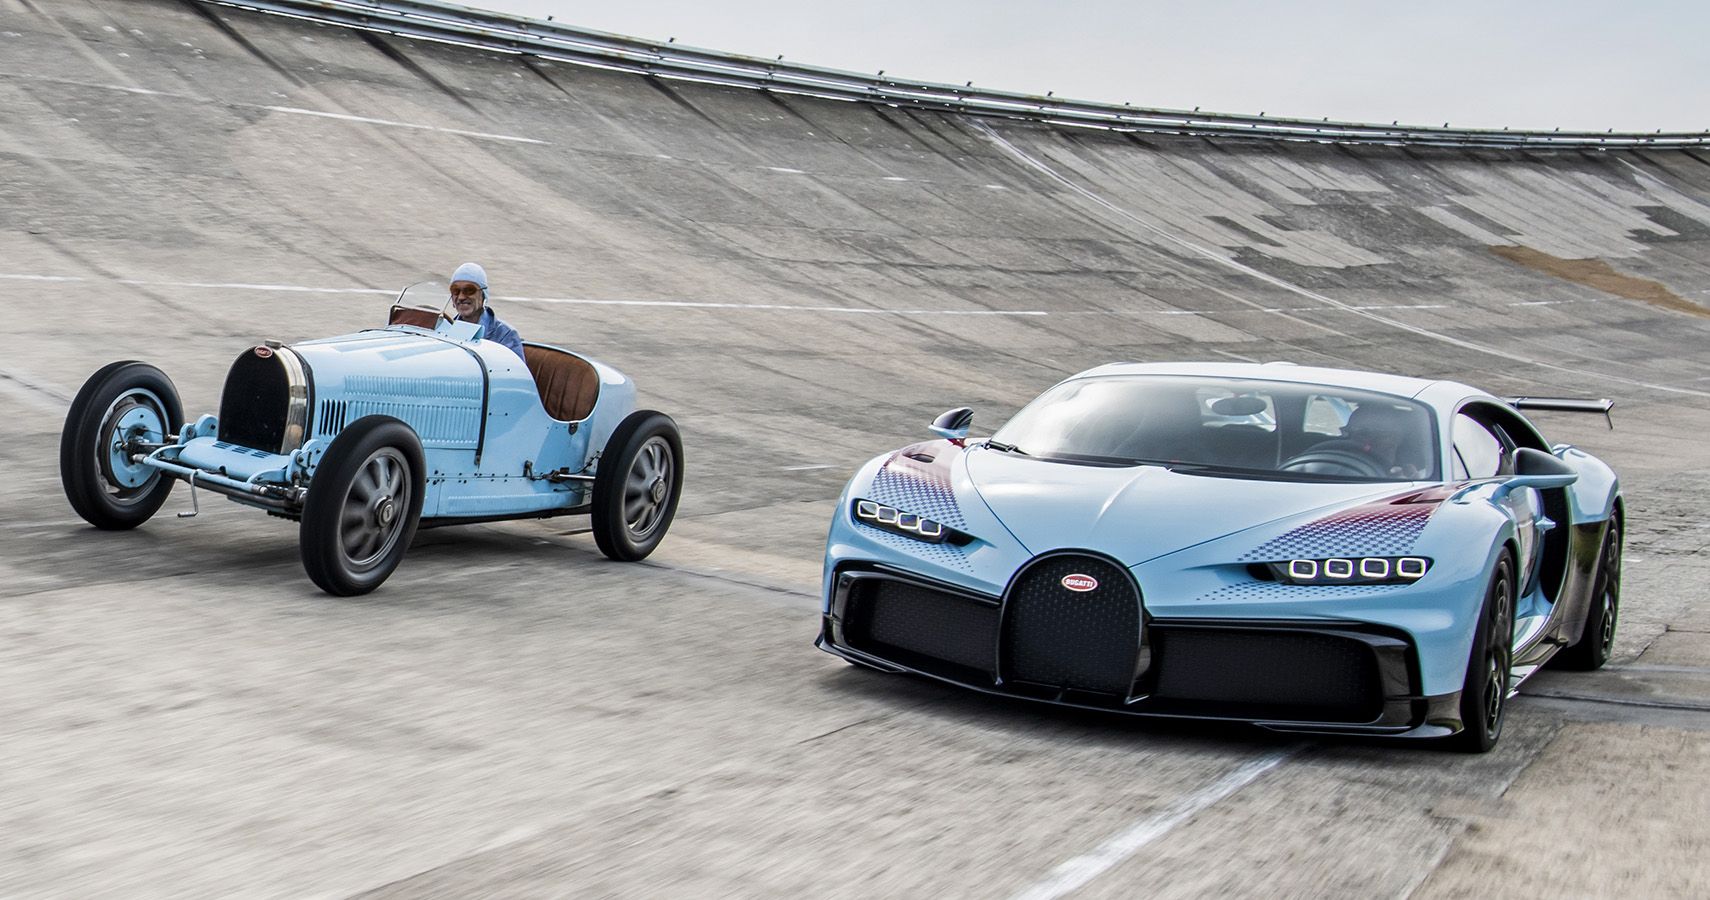 All The Ultra-Bespoke Features On This Bugatti Chiron Pur Sport, Detailed